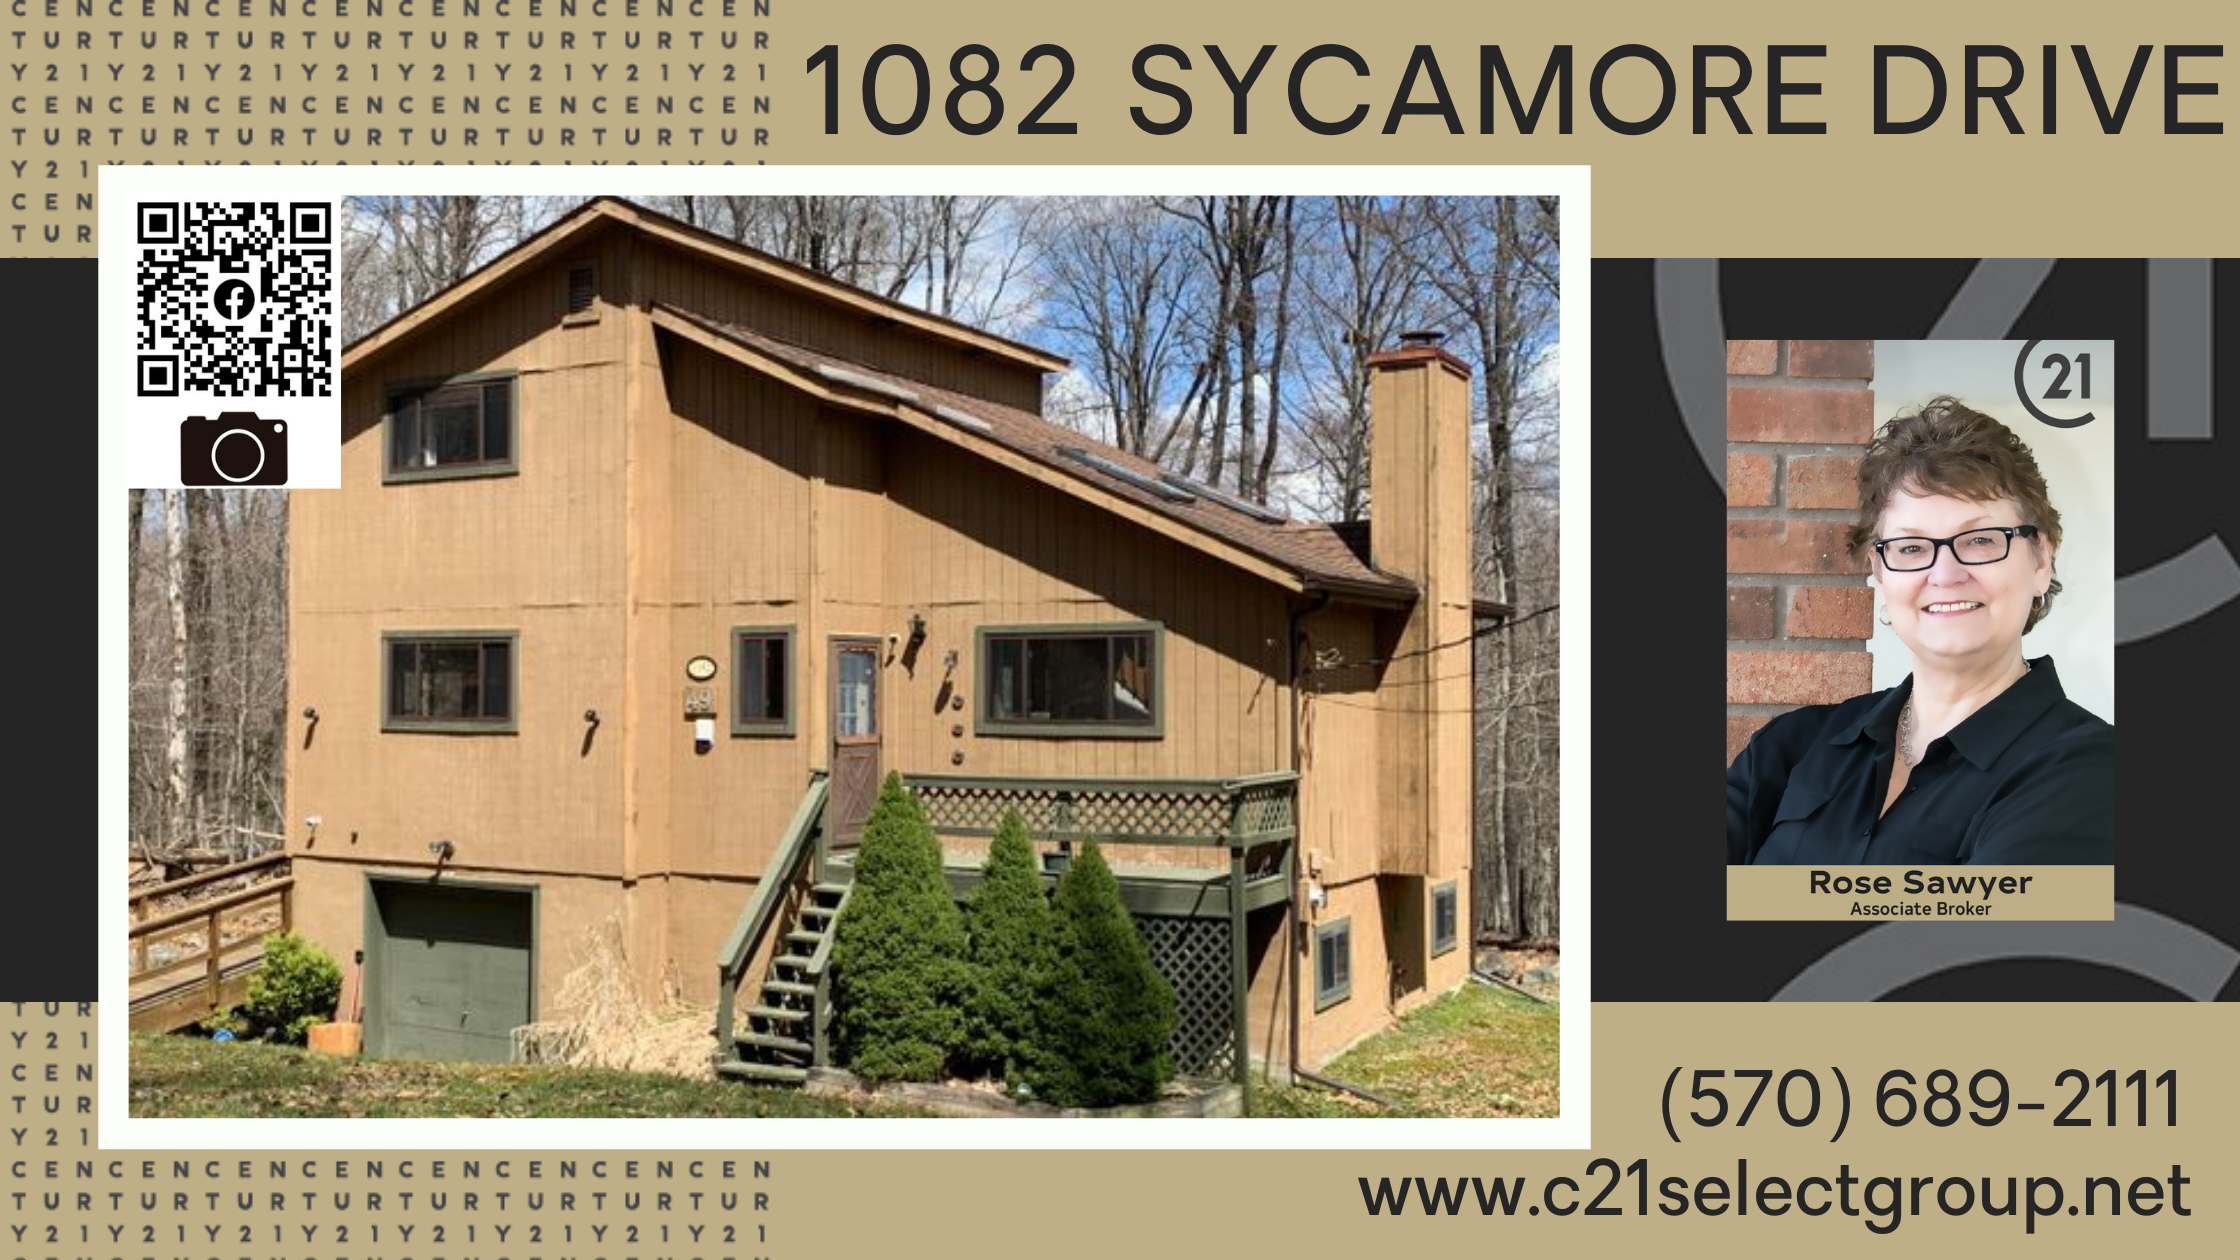 Just Reduced! 1082 Sycamore Drive: Peace & Privacy in Pocono Springs